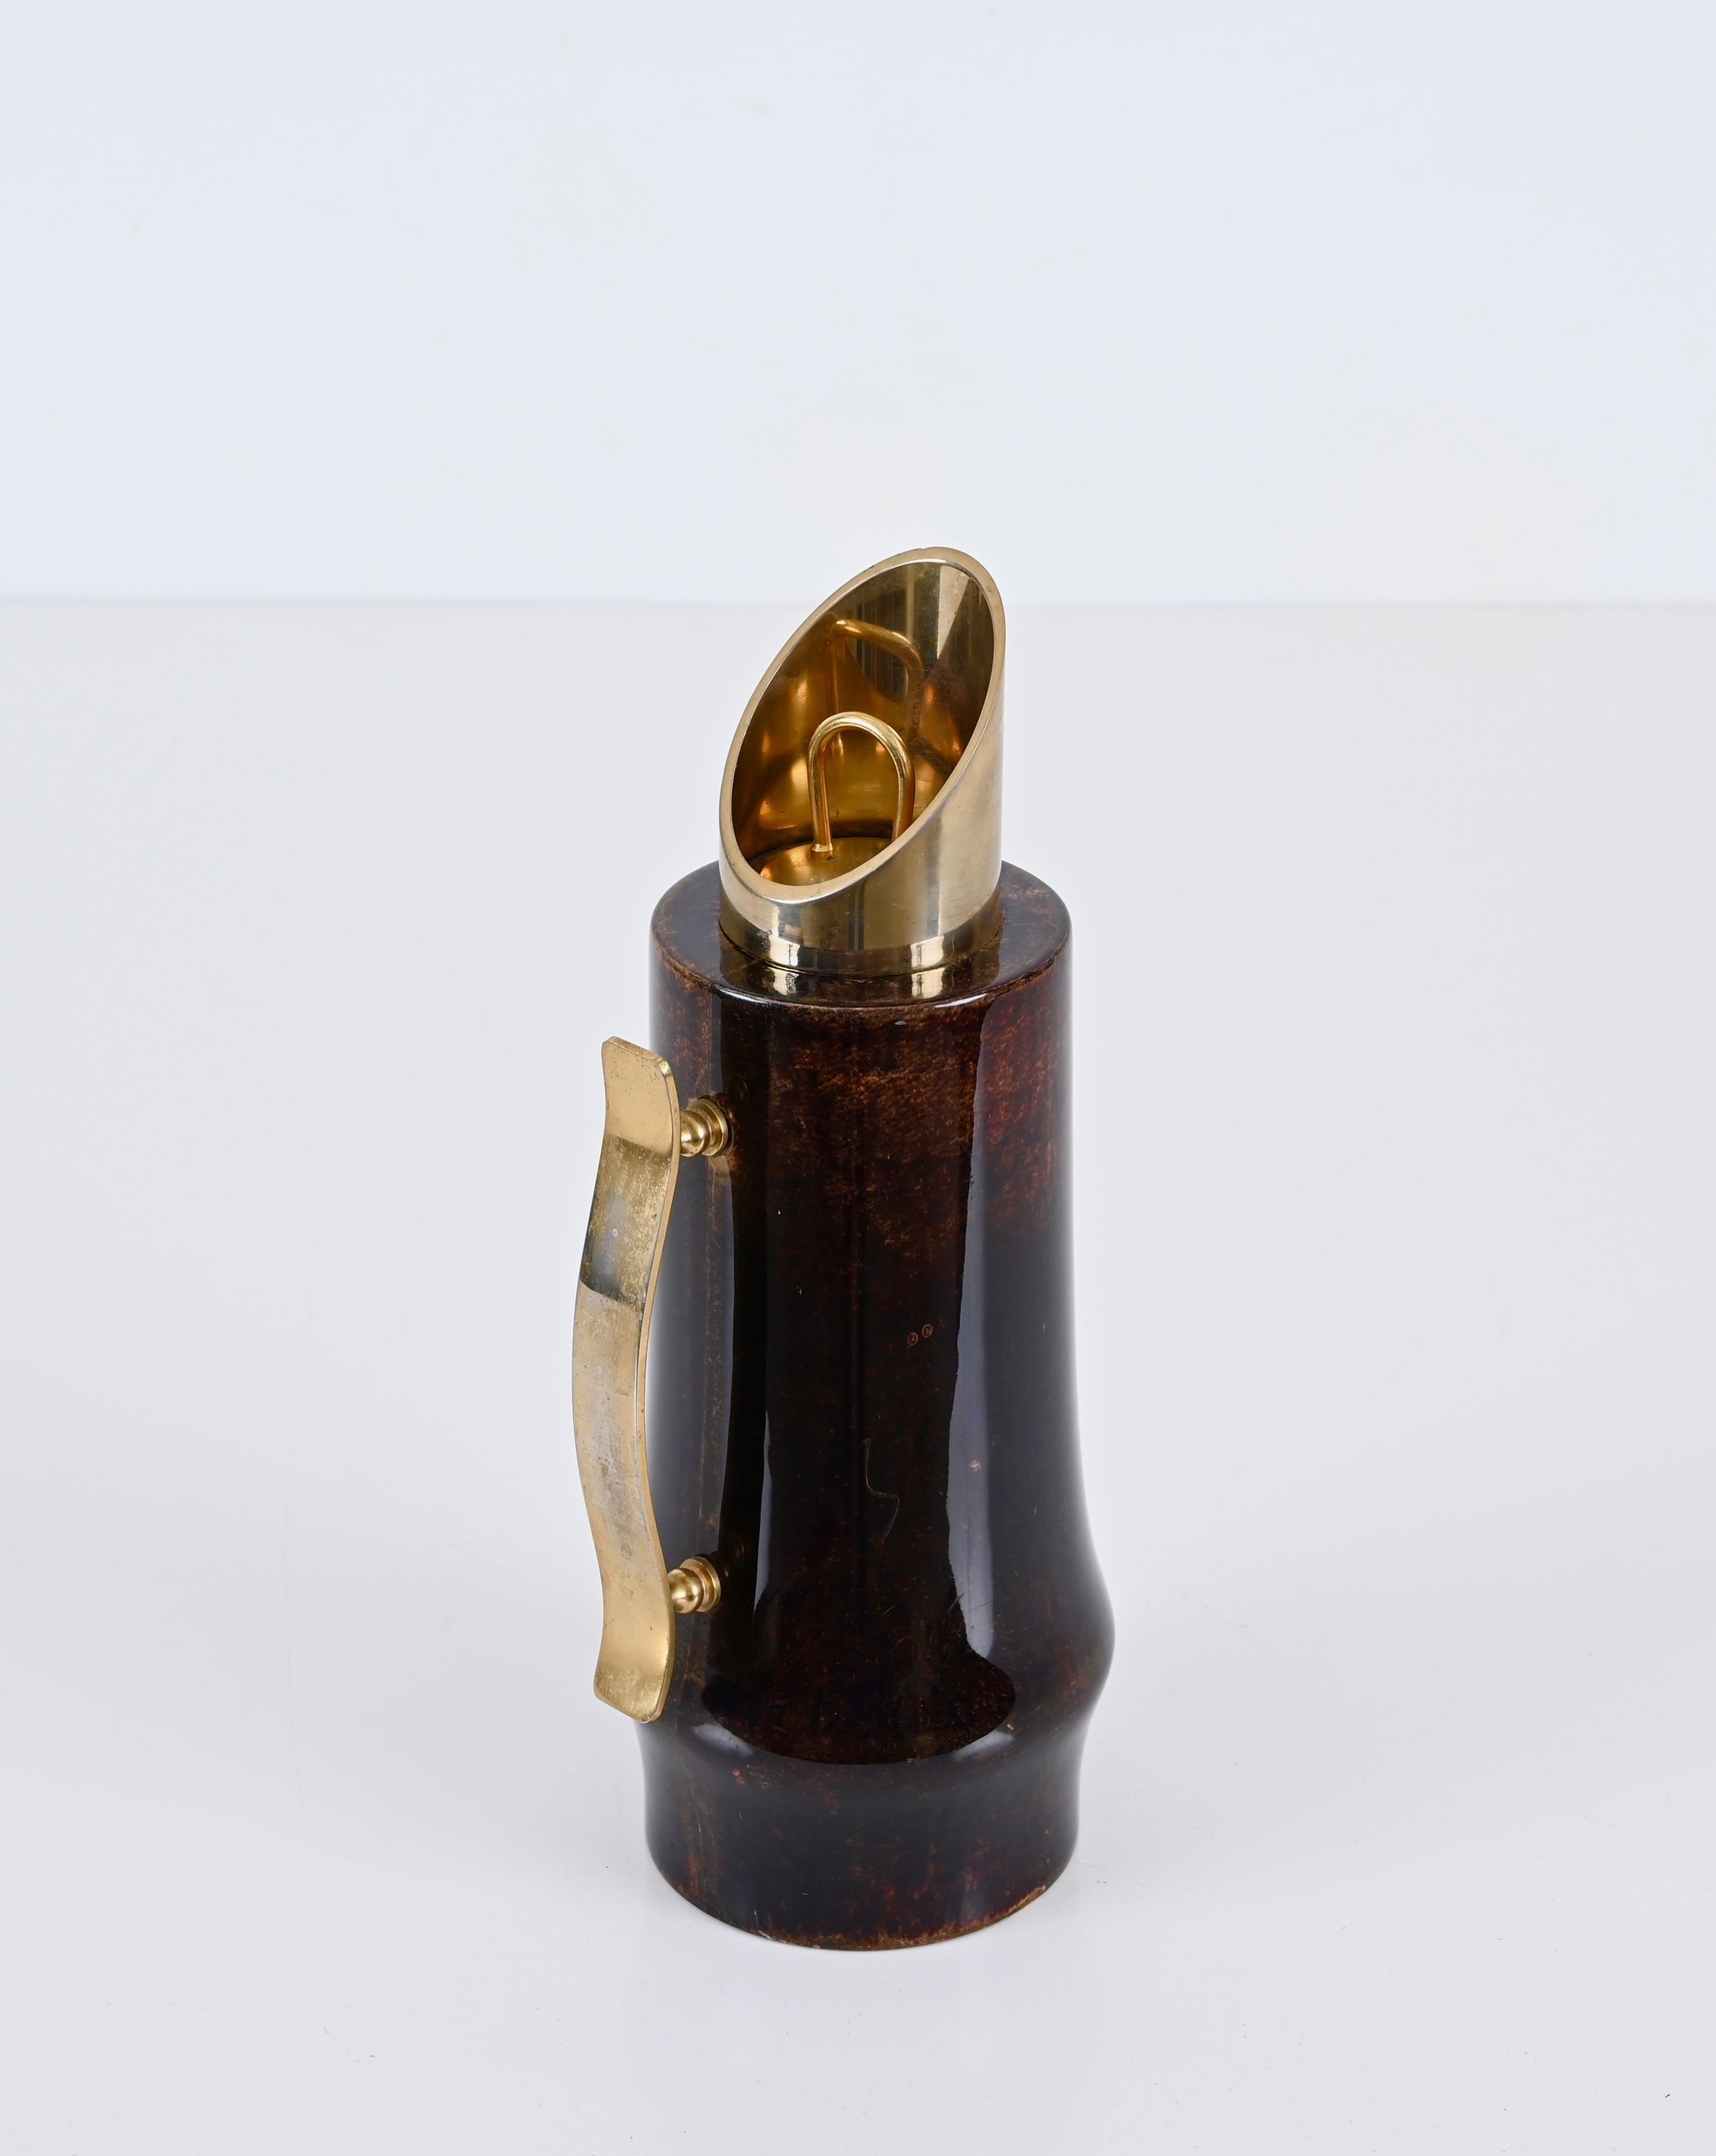 Italian Aldo Tura Midcentury Goatskin and Brass Thermos Decanter for Macabo, Italy 1950s For Sale